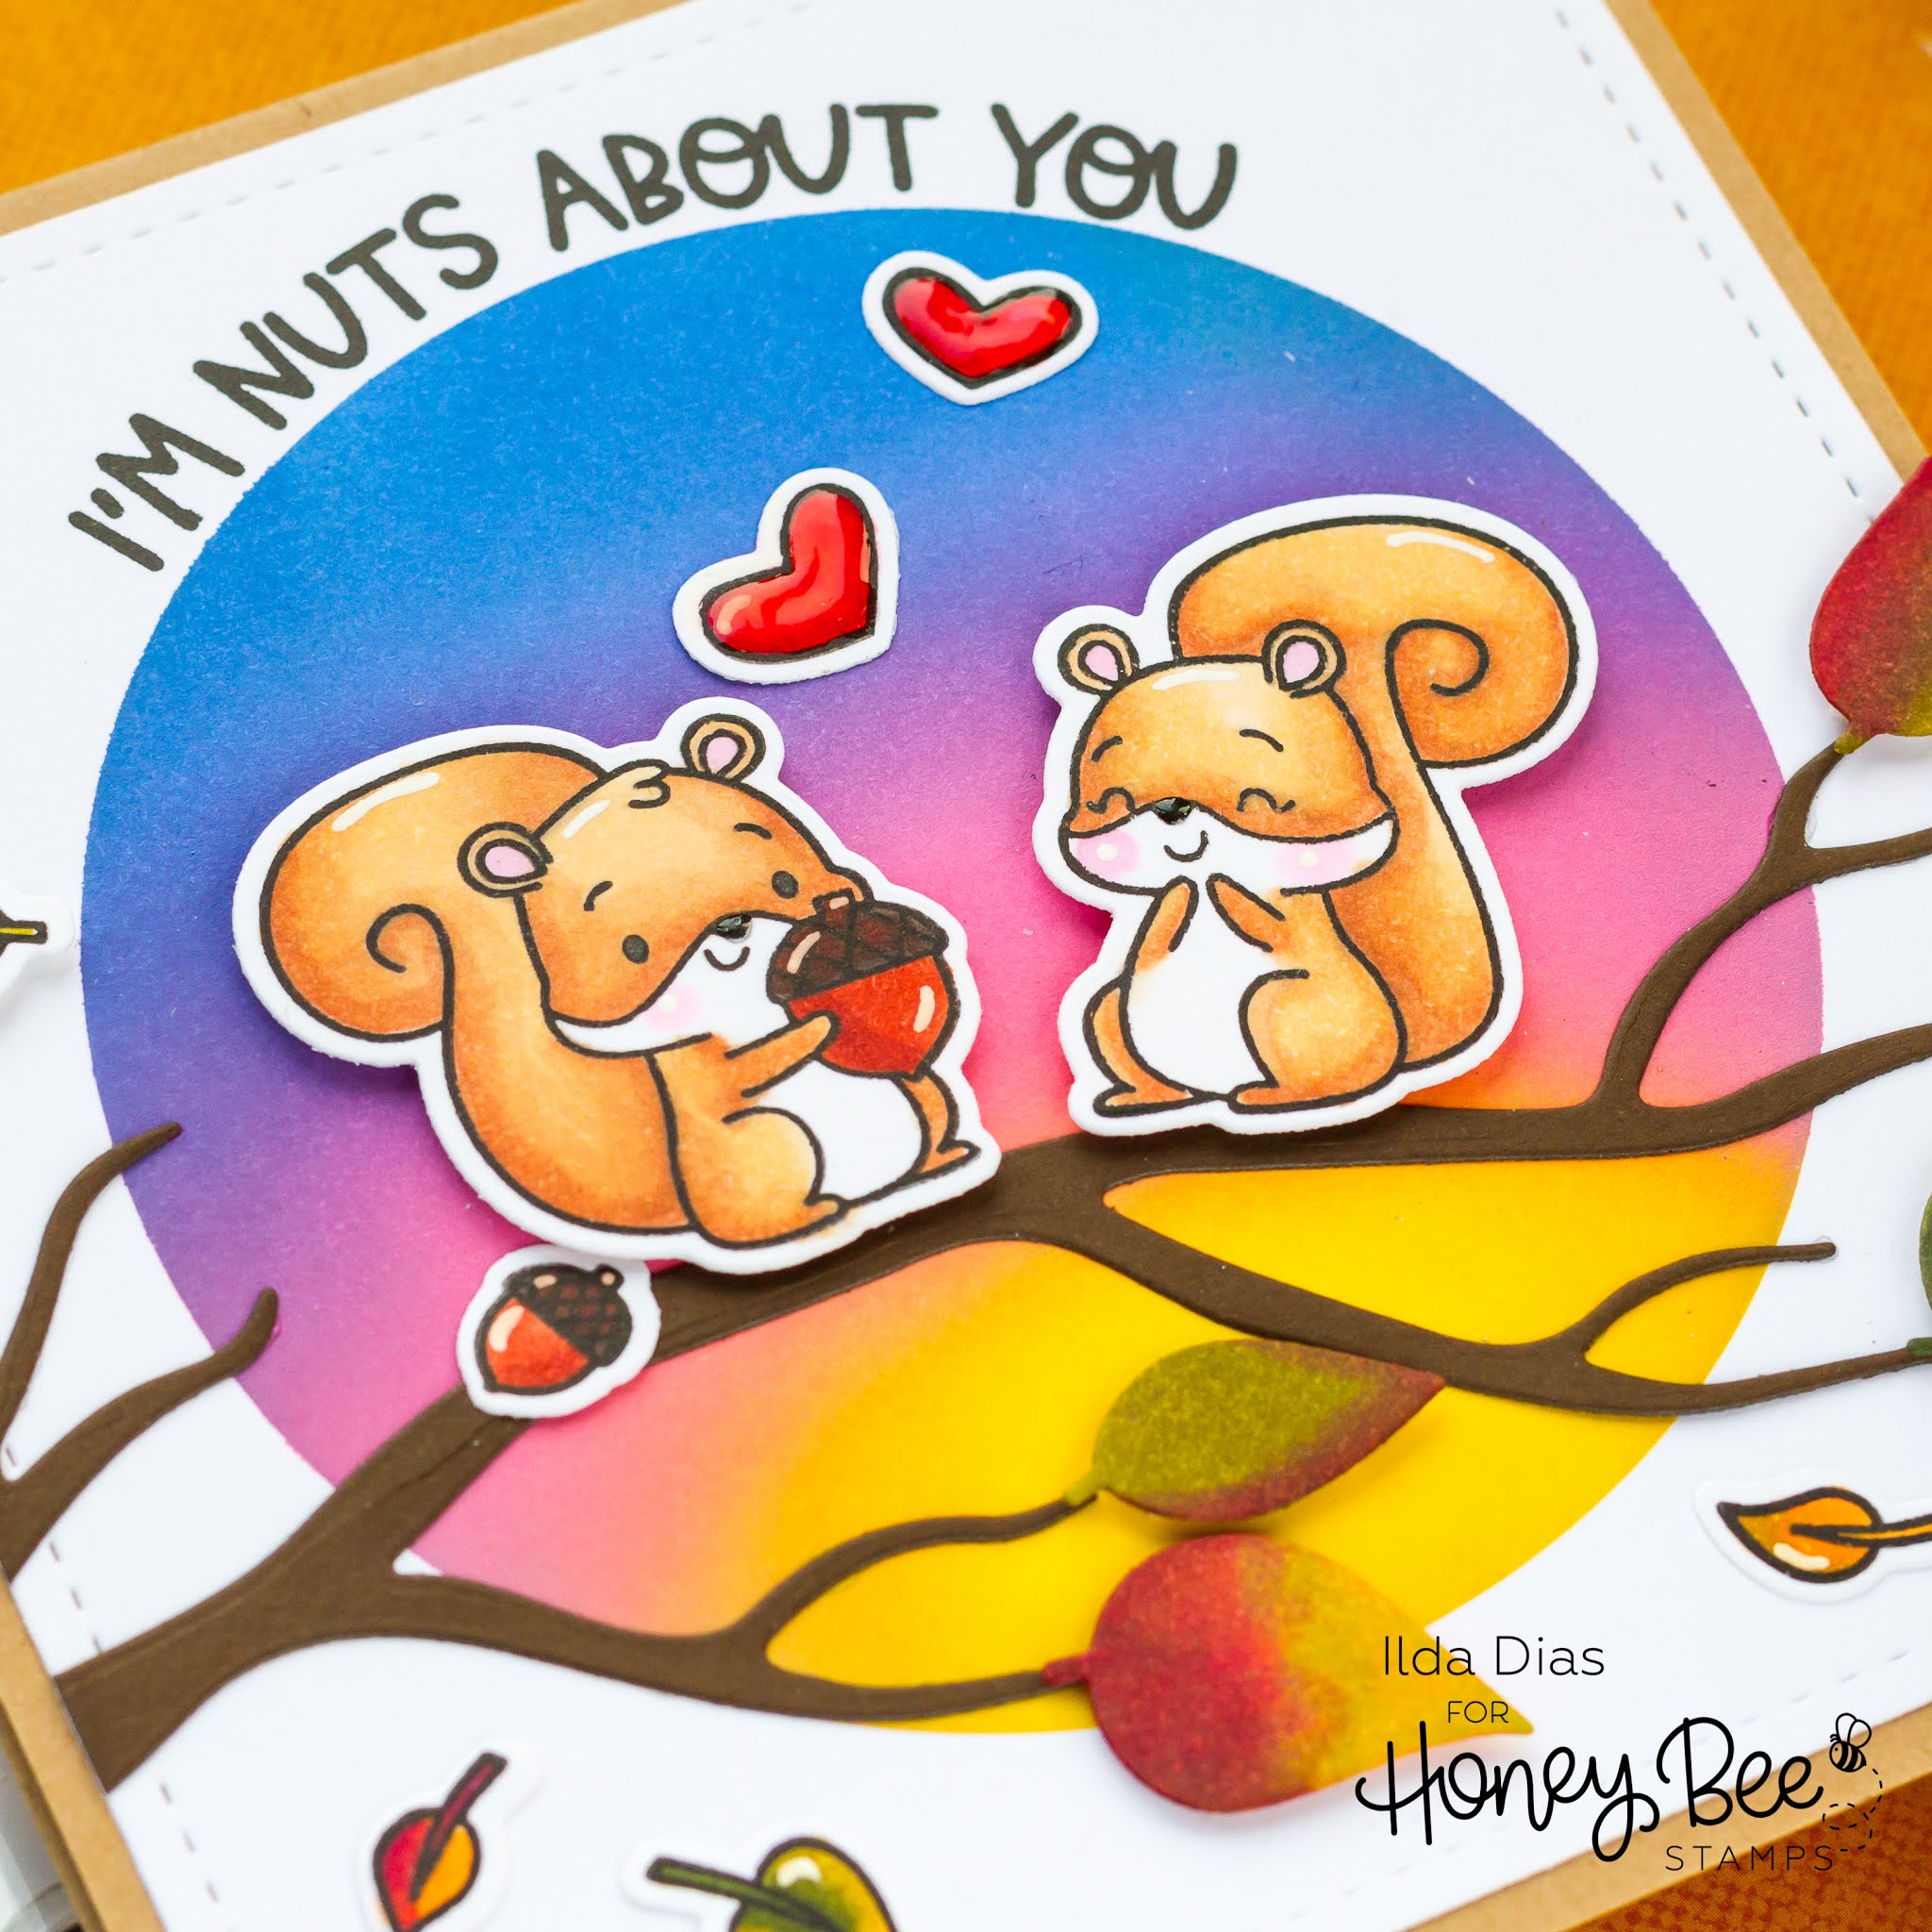 Arbuya Autumn Squirrel Clear Stamps for Journaling or Card Making, Nuts  Mushroom Sentiment Rubber Stamps for Journals Planners Scrapbooking Paper